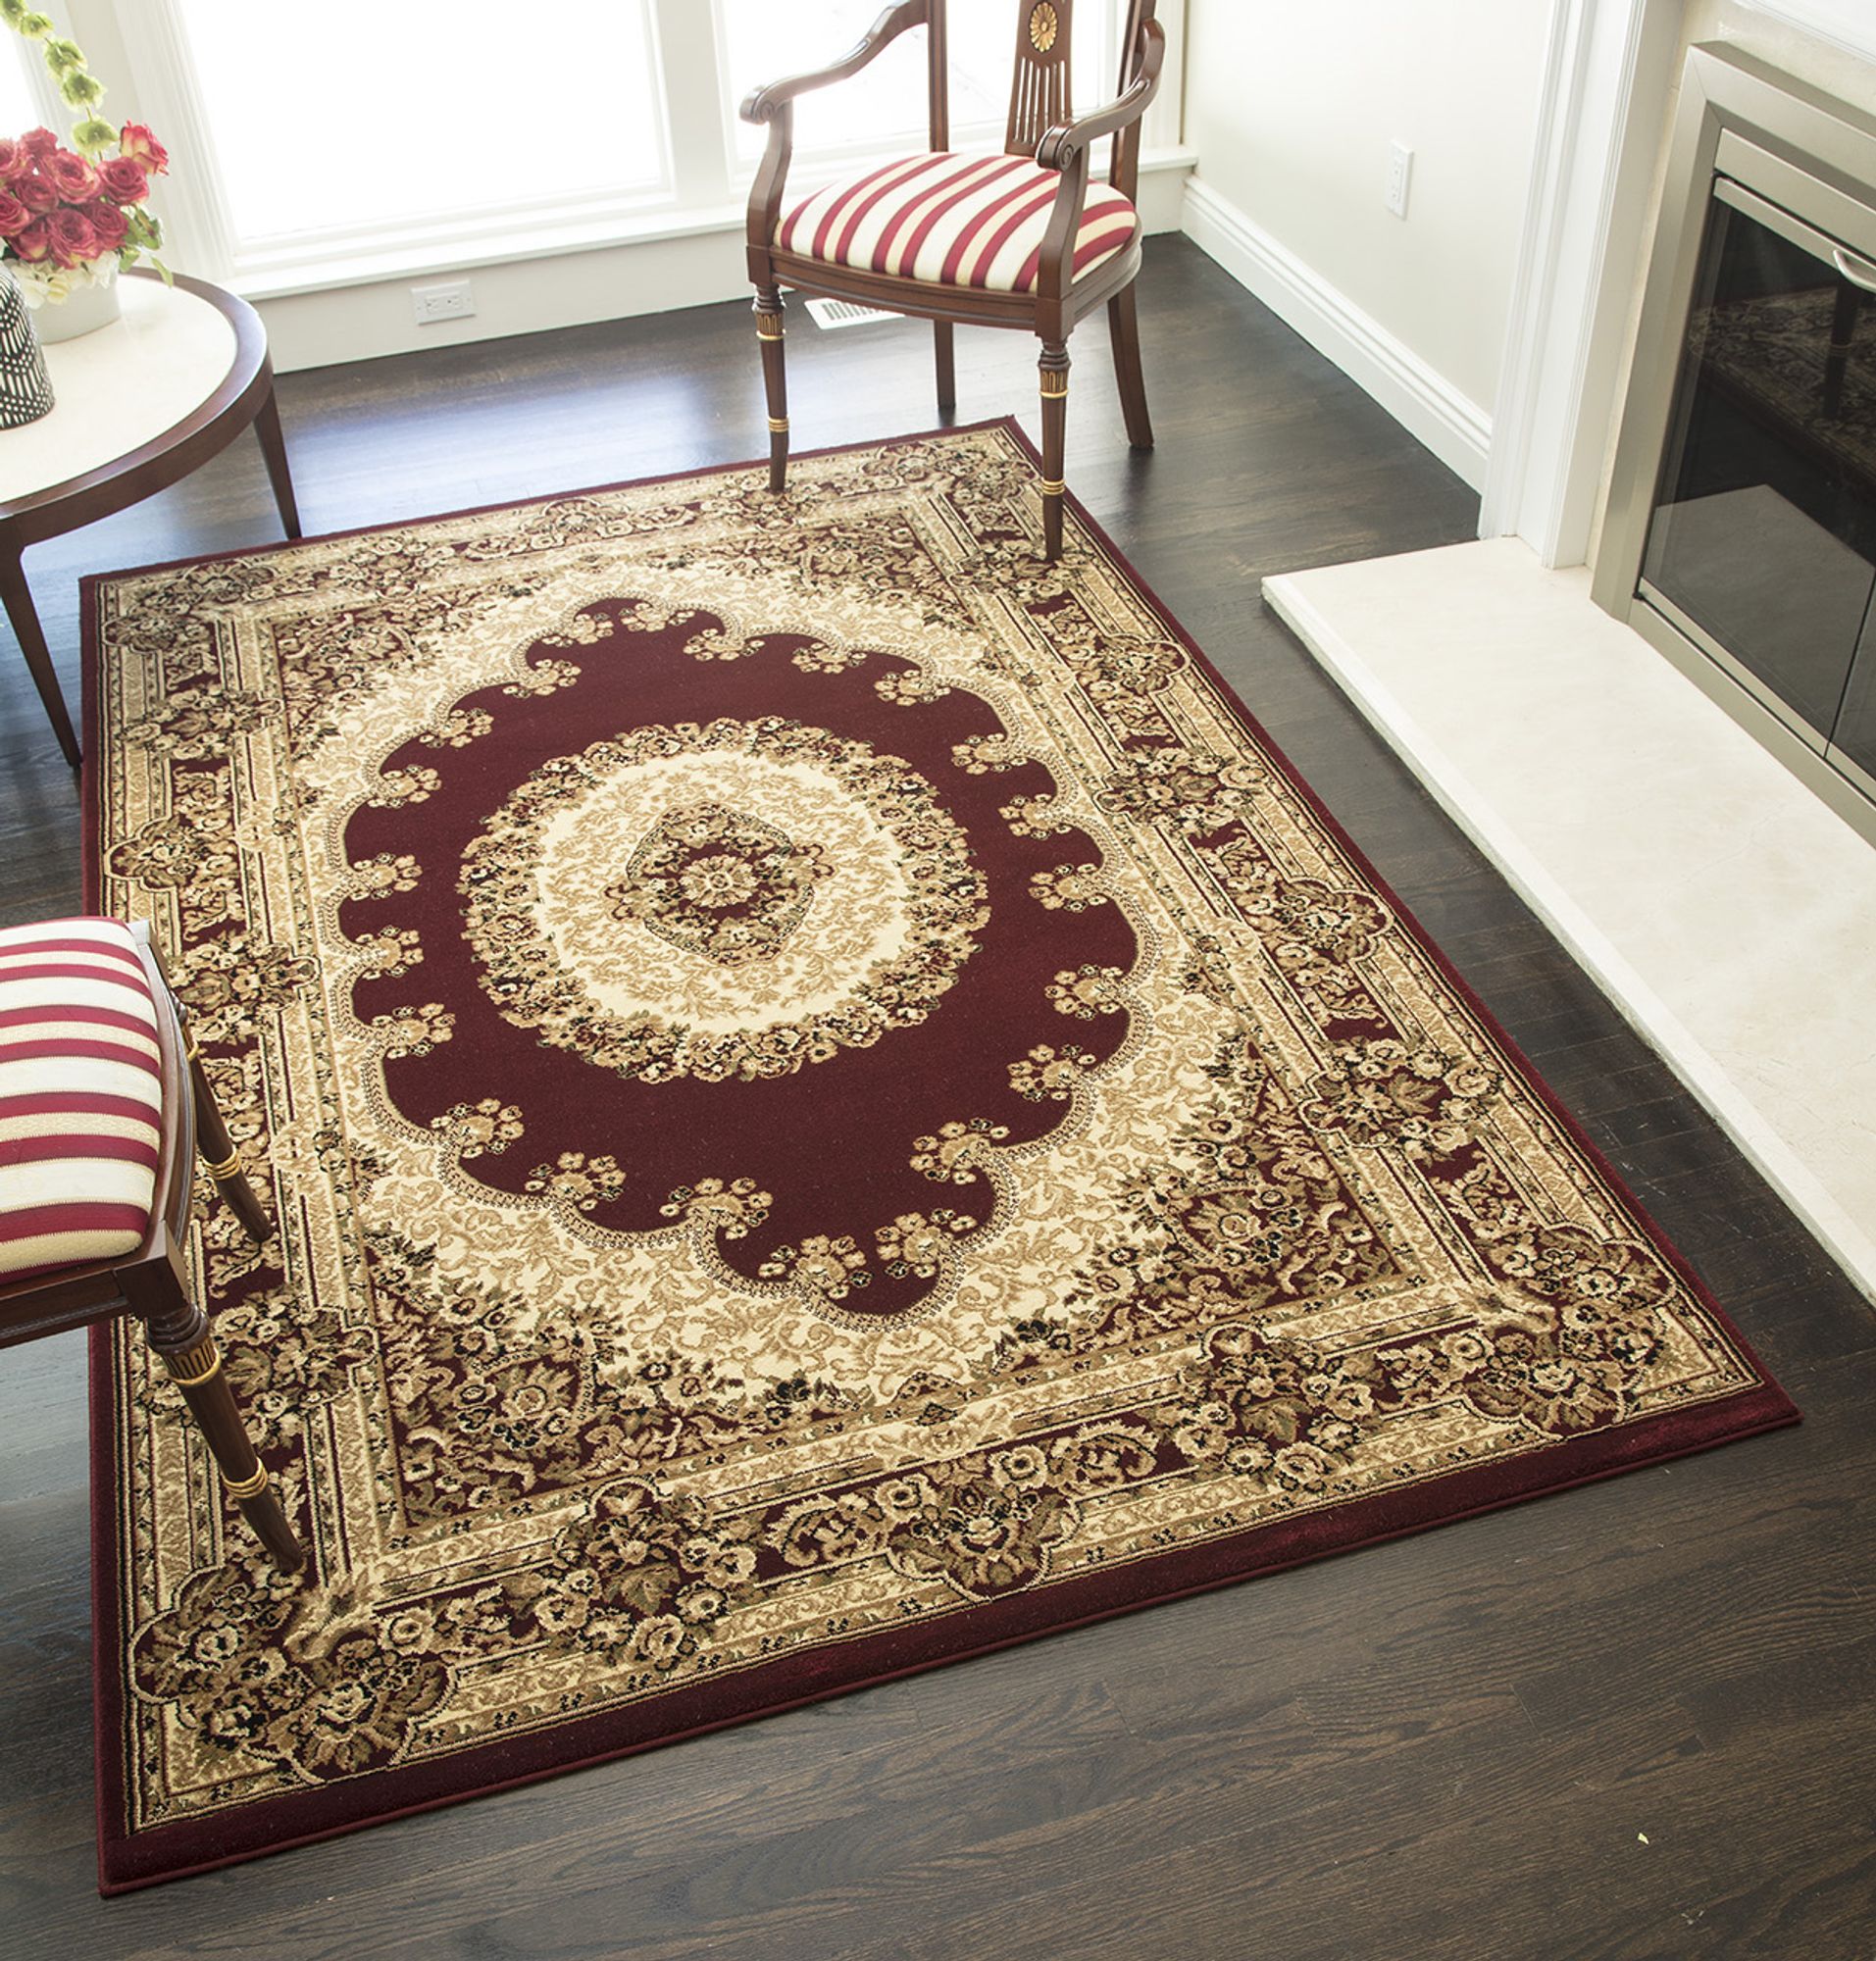 Rugs America Vista 807-RED Kerman Red Oriental Traditional Red Area Rug, 5'3"x7'10" - image 2 of 5